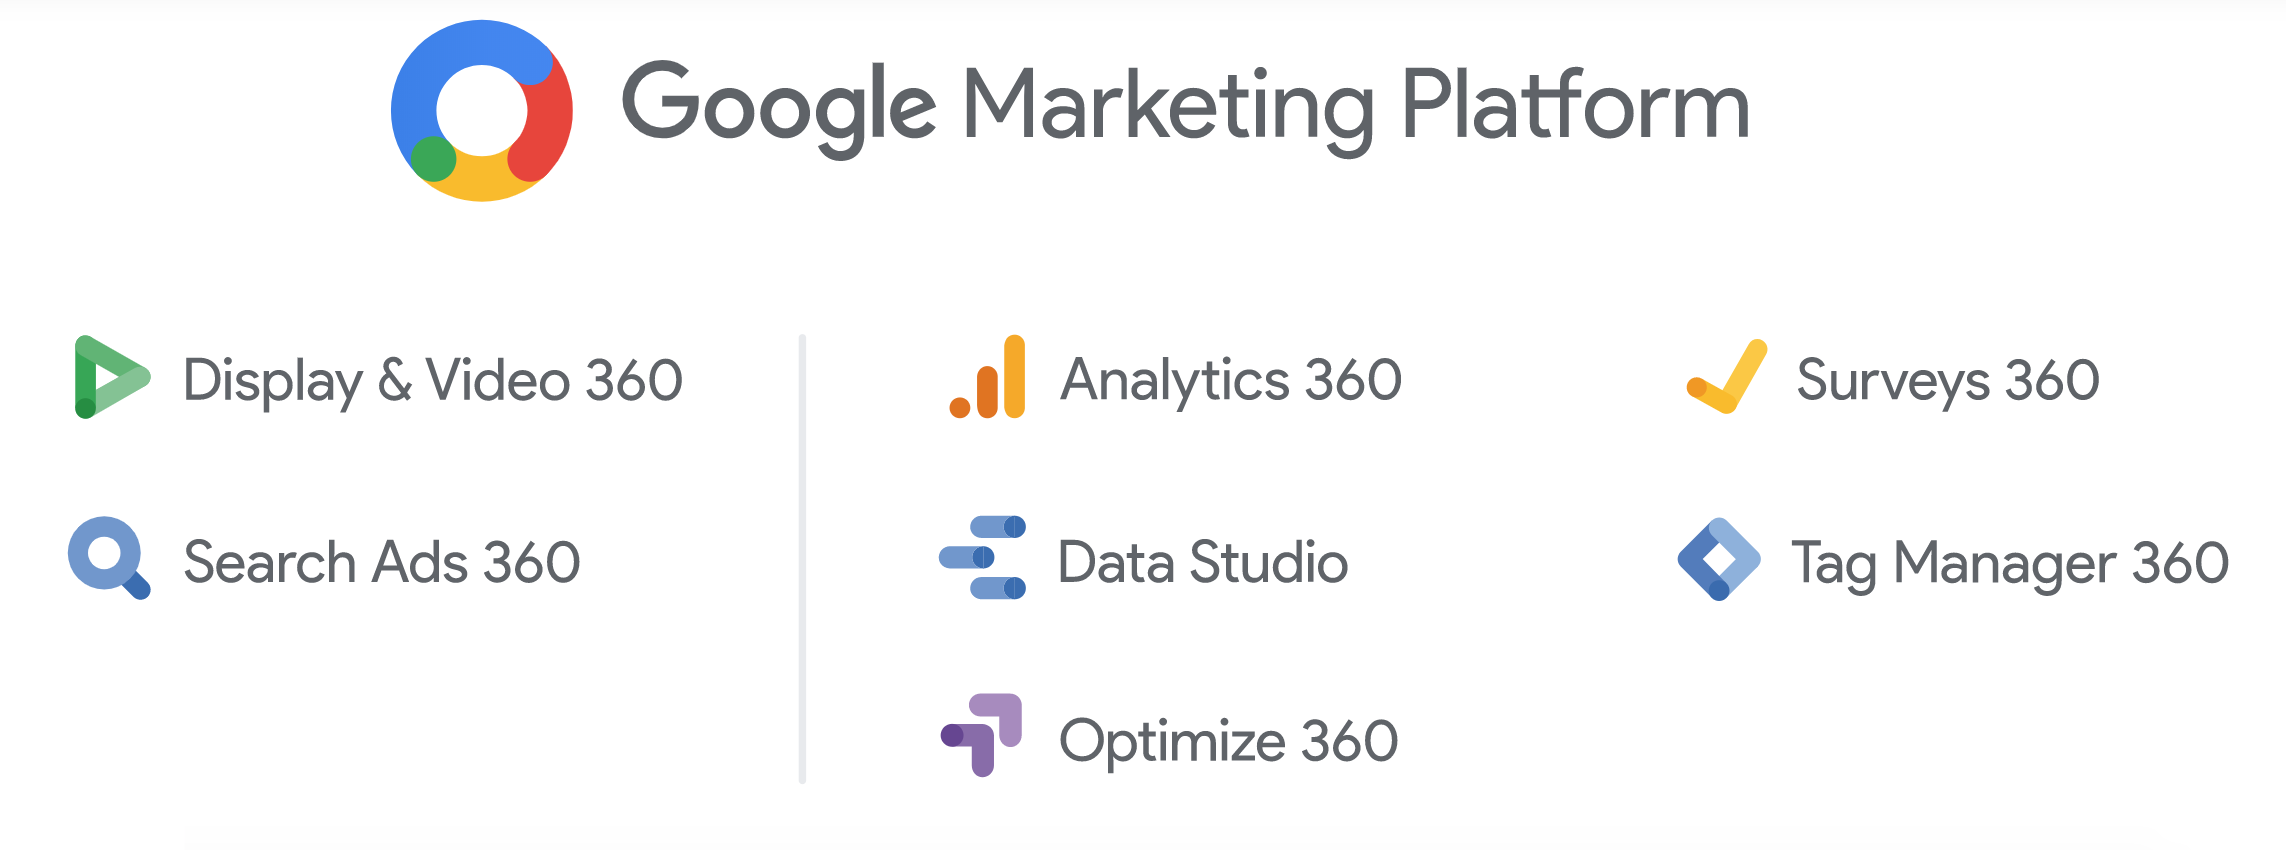 The image shows the new features of the Google Marketing Platform, © Google:
- Display & Video 360
- Search Ads 360
- Analytics 360
- Data Studio
- Optimize 360
- Surveys 360
- Tag Manager 360